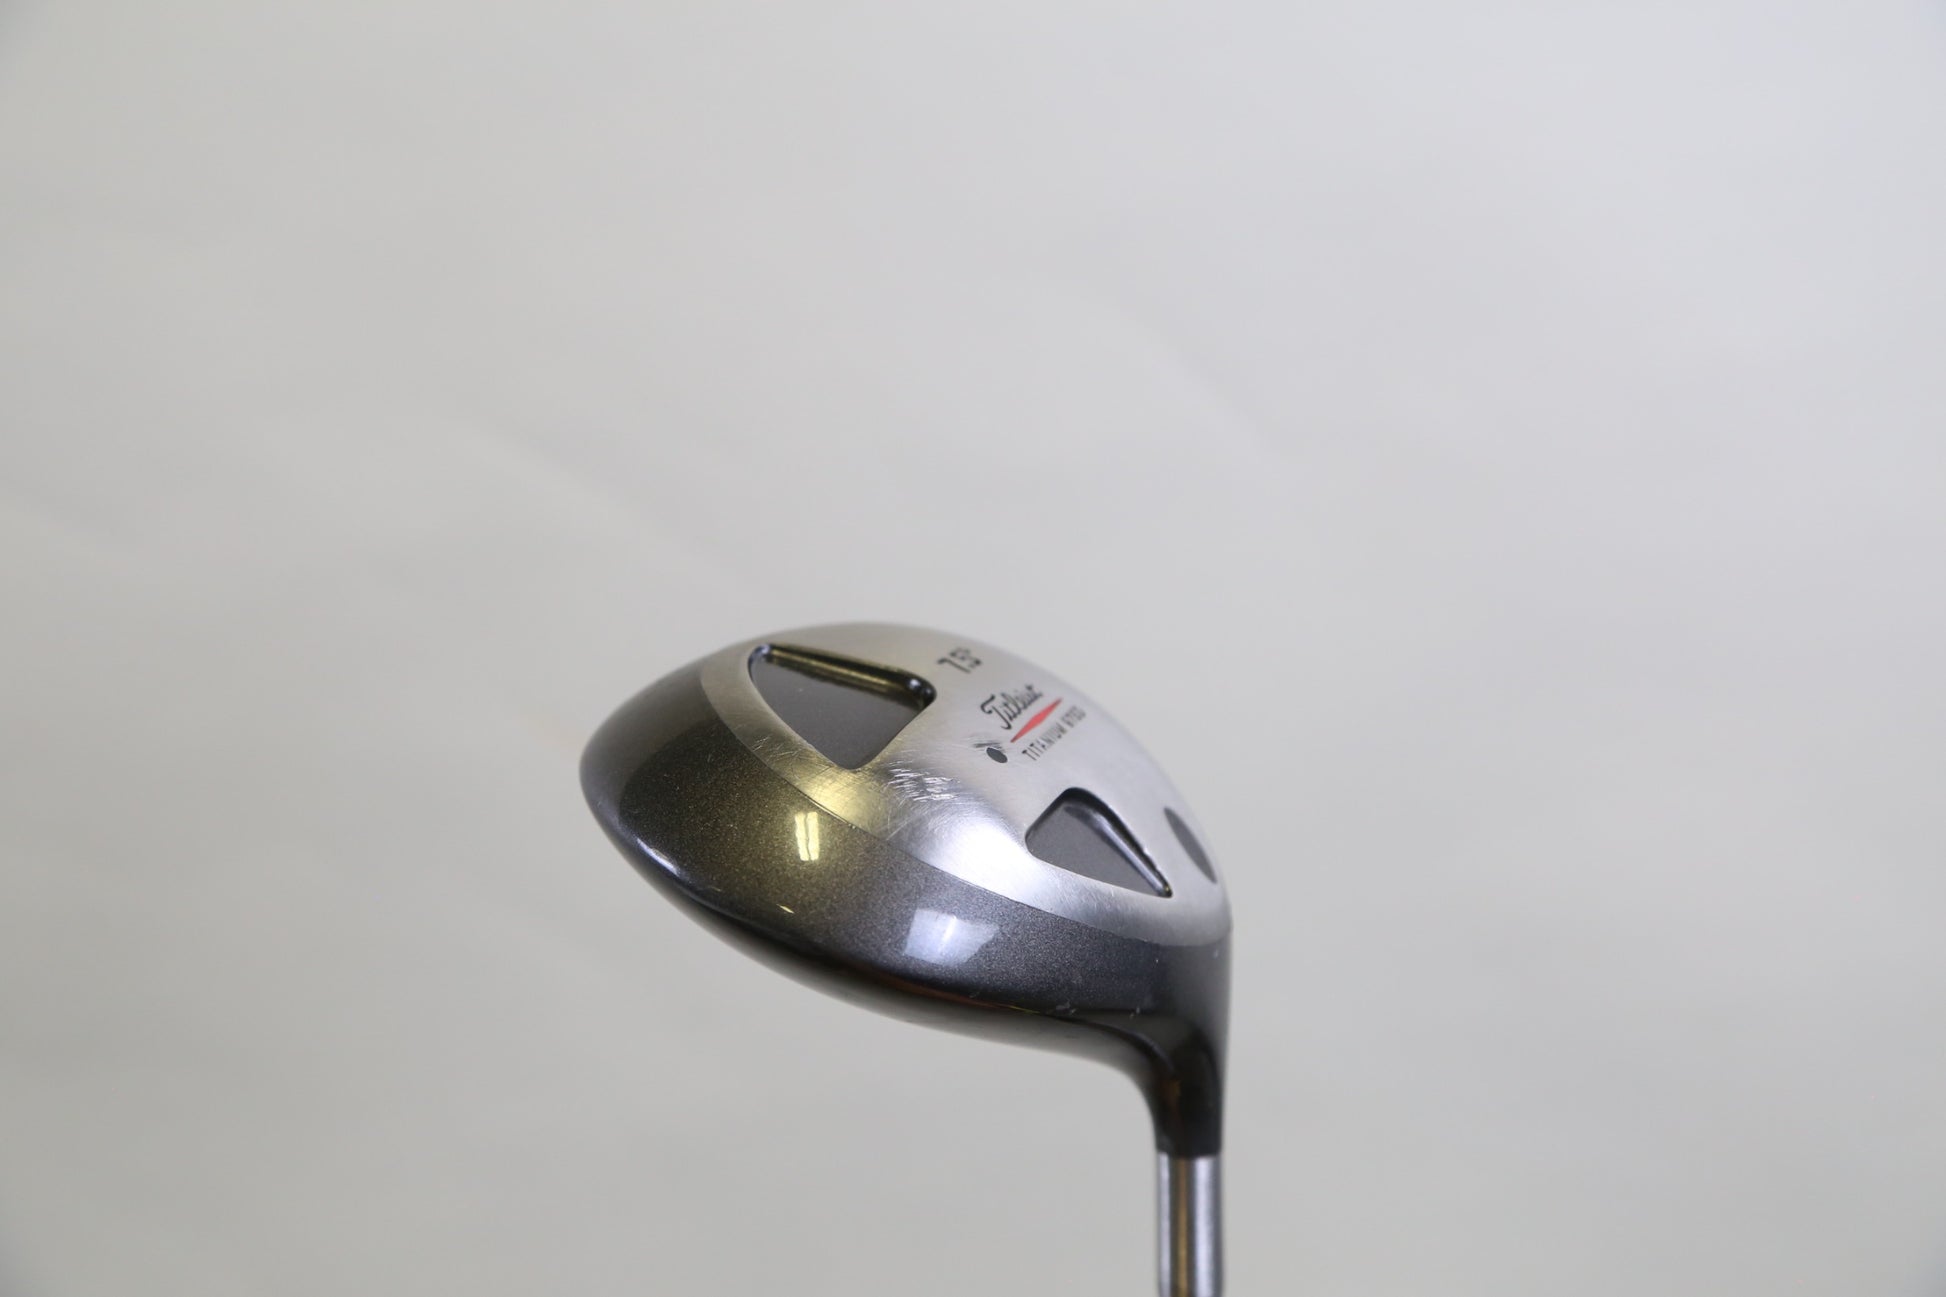 Used Titleist 975D Driver - Right-Handed - 7.5 Degrees - Regular Flex-Next Round